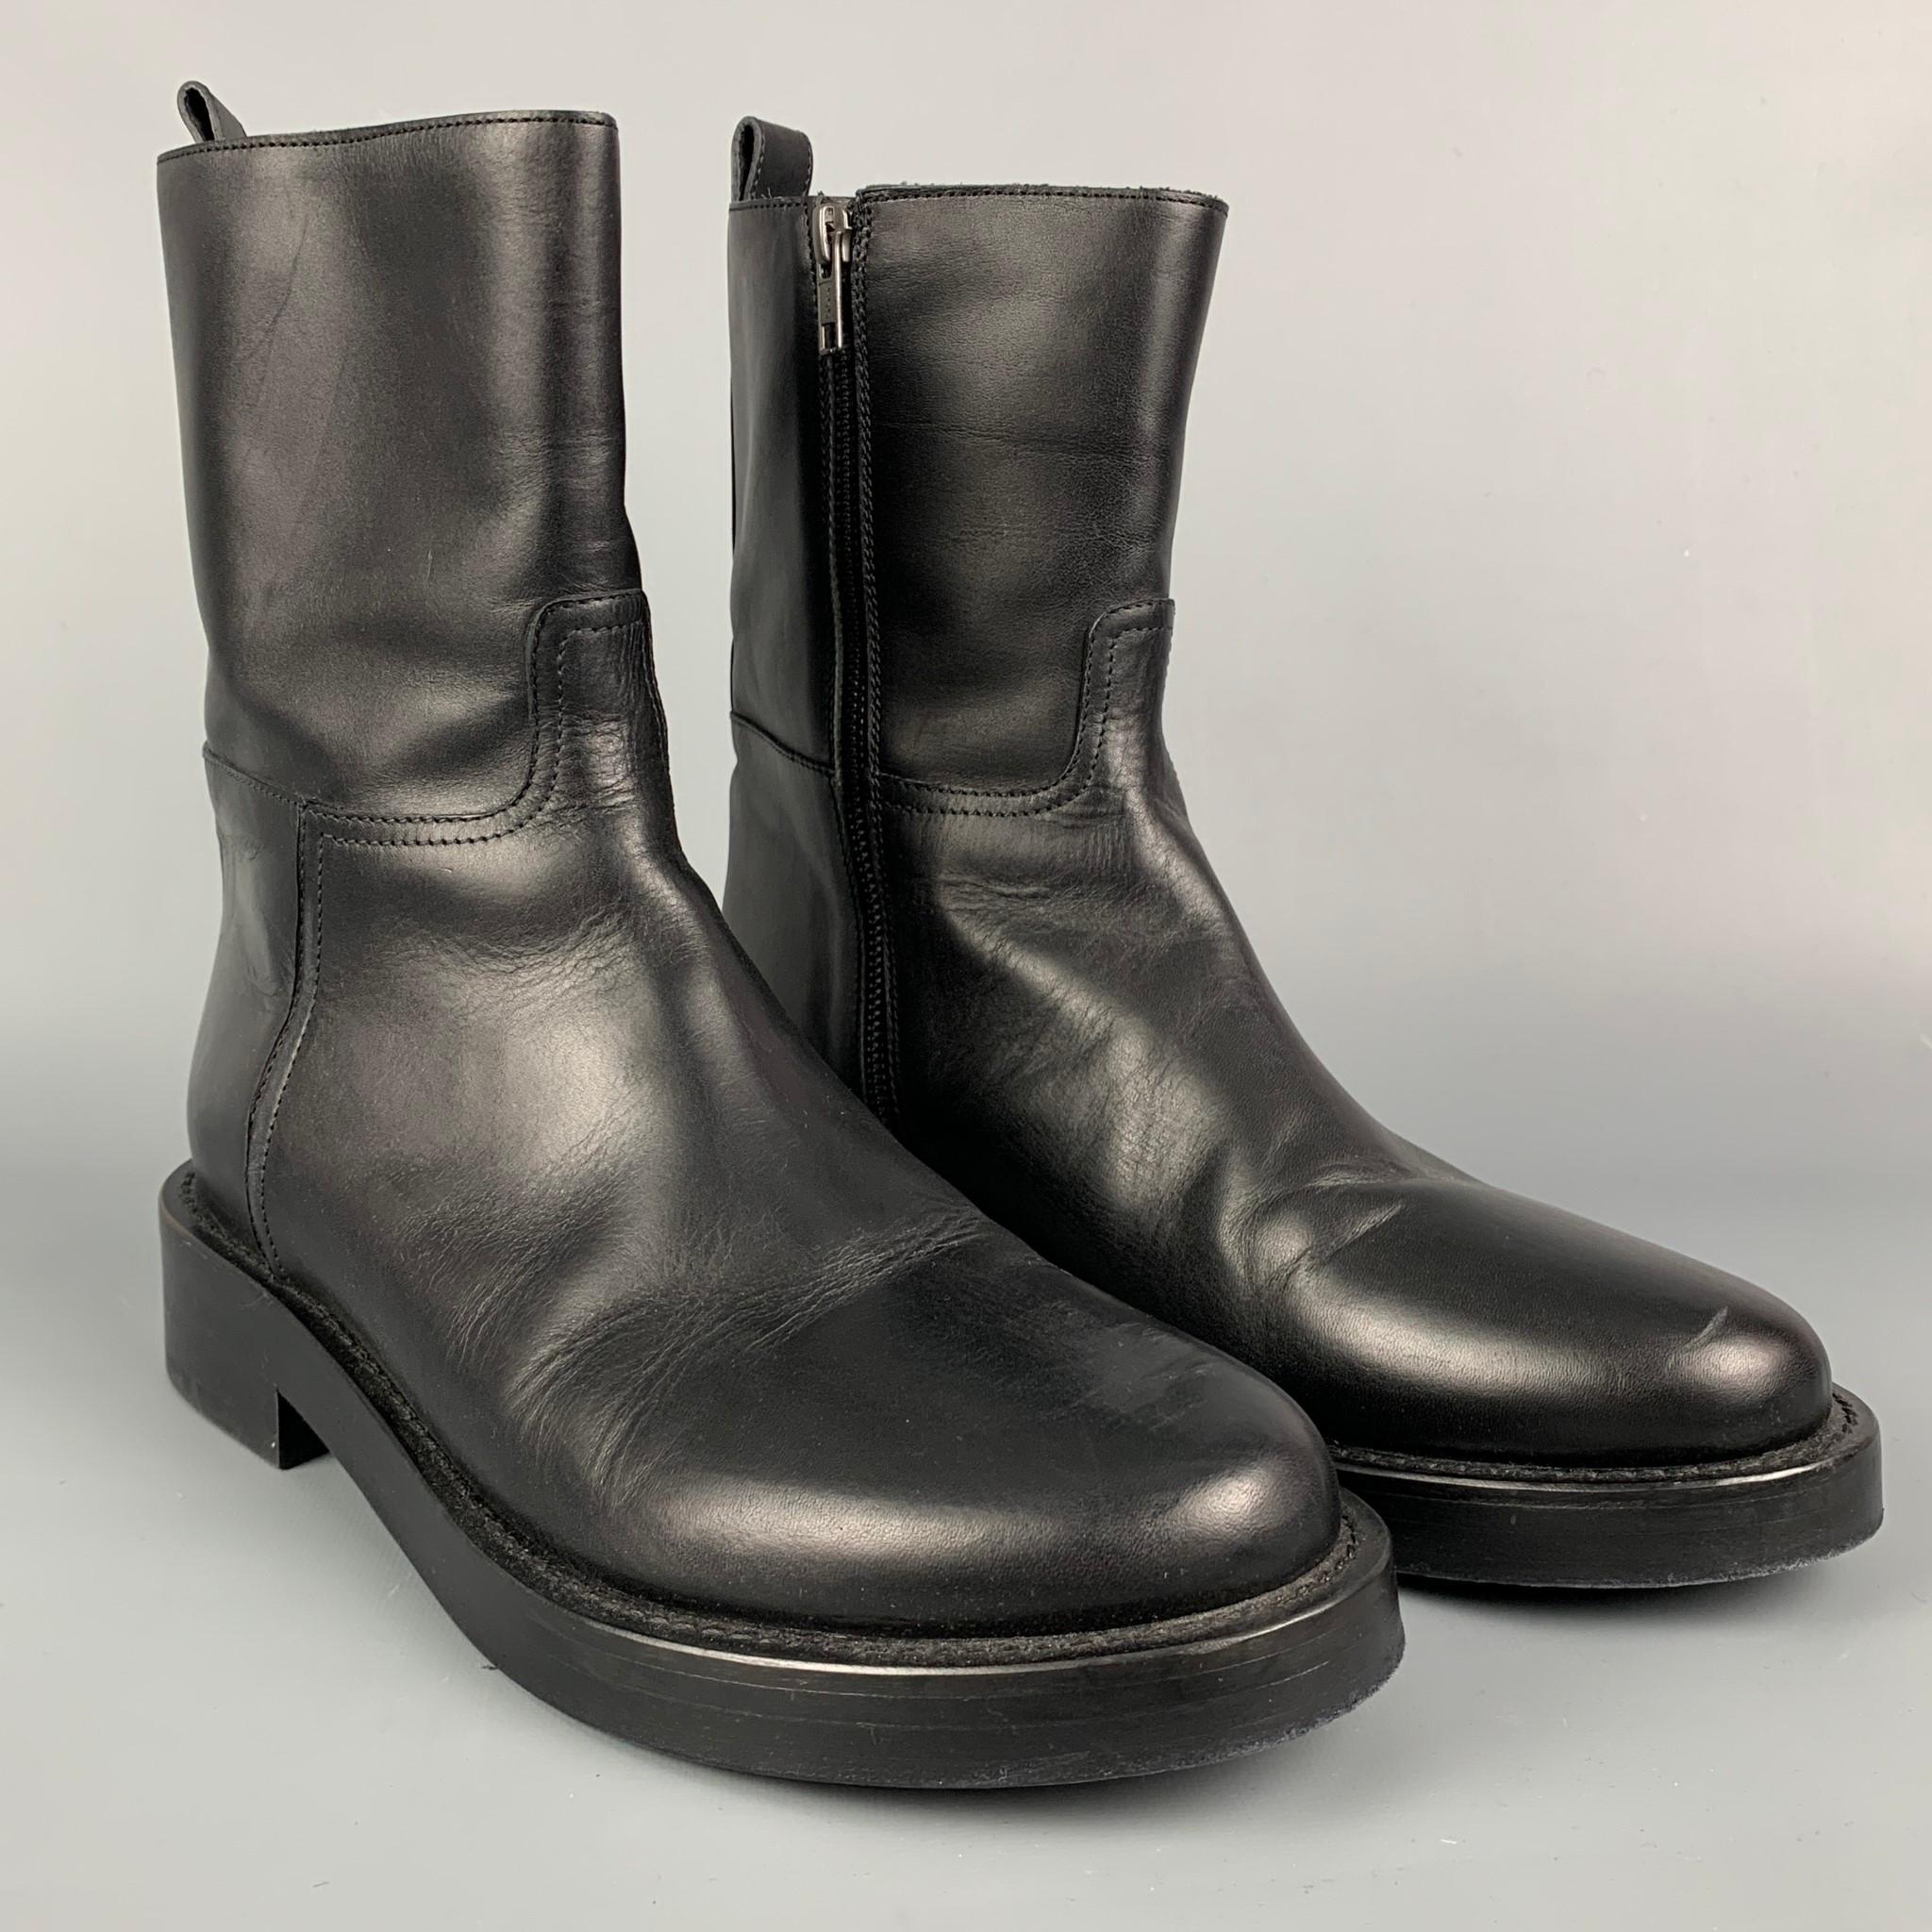 ANN DEMEULEMEESTER boots comes in a black leather featuring a round toe, chunky heel, and a side zipper closure. Made in Italy. 

Very Good Pre-Owned Condition.
Marked: 43

Measurements:

Length: 12 in.
Width: 4.5 in.
Height: 8.5 in. 